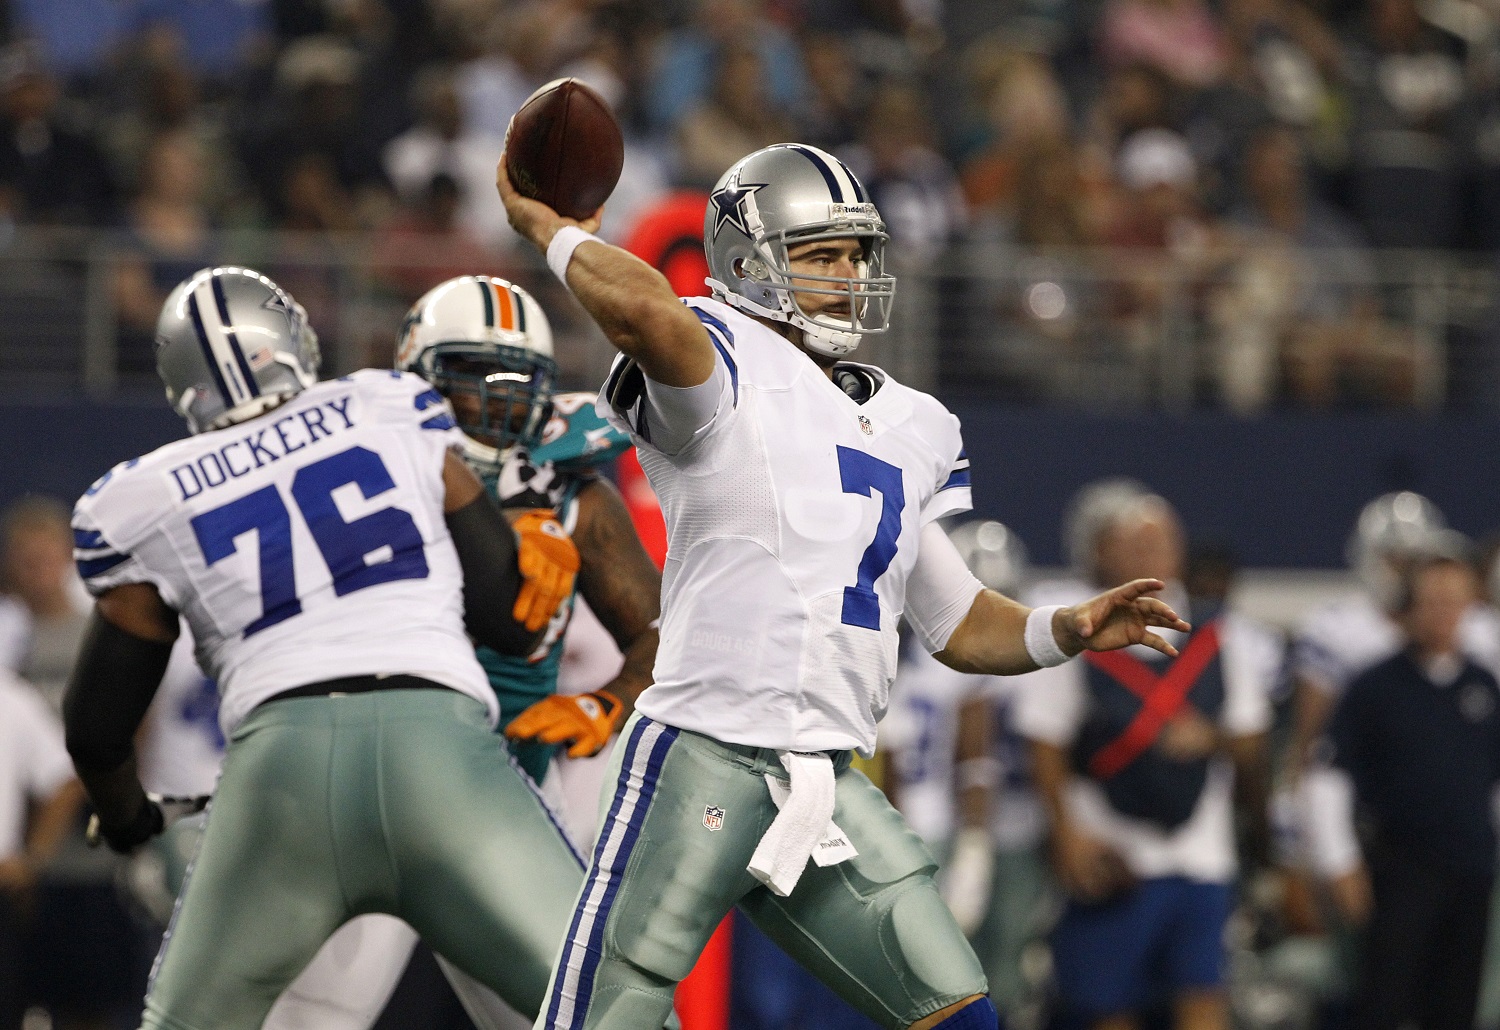 Dallas Cowboys' Derrick Dockery (76) provides coverage as Stephen McGee (7) passes against the Miami Dolphins in the first half of a preseason NFL football game Wednesday, Aug. 29, 2012, in Arlington, Texas. (AP Photo/Tony Gutierrez)